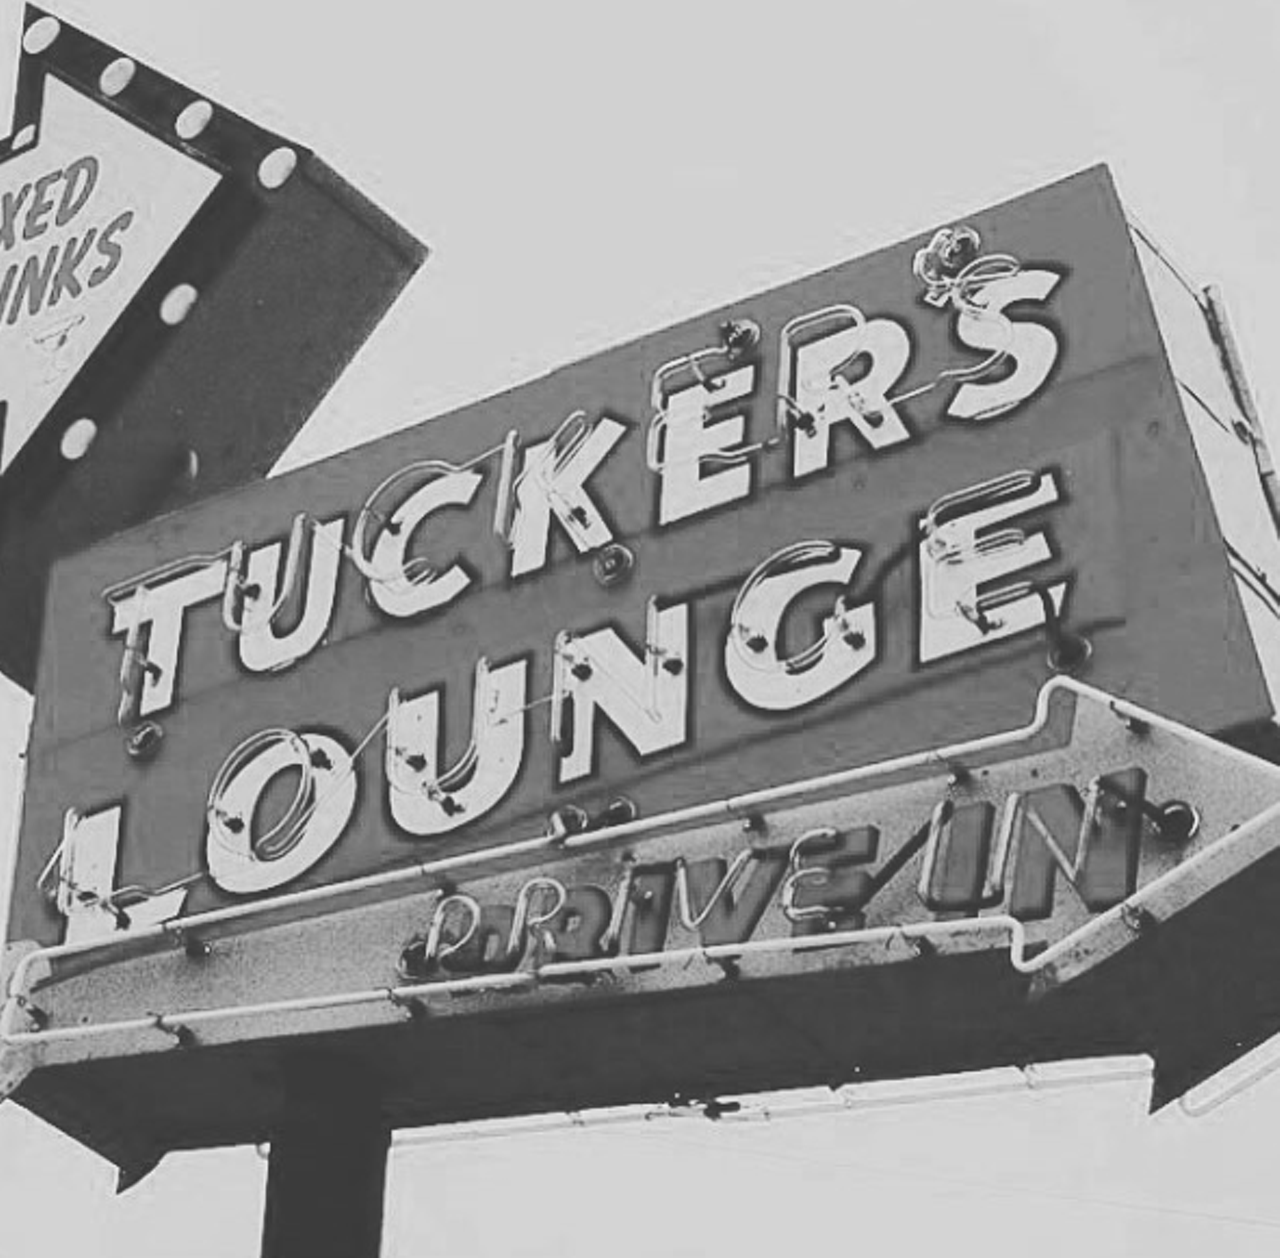 Tucker’s Kozy Korner
11338 E. Houston St., (210) 320-2192
With a slogan that says "small ktichen, big soul" you already know the food is authentic and the tunes are catchy. Treat yourself to a night out at Tucker's.
Photo via Instagram, tuckerskozykorner